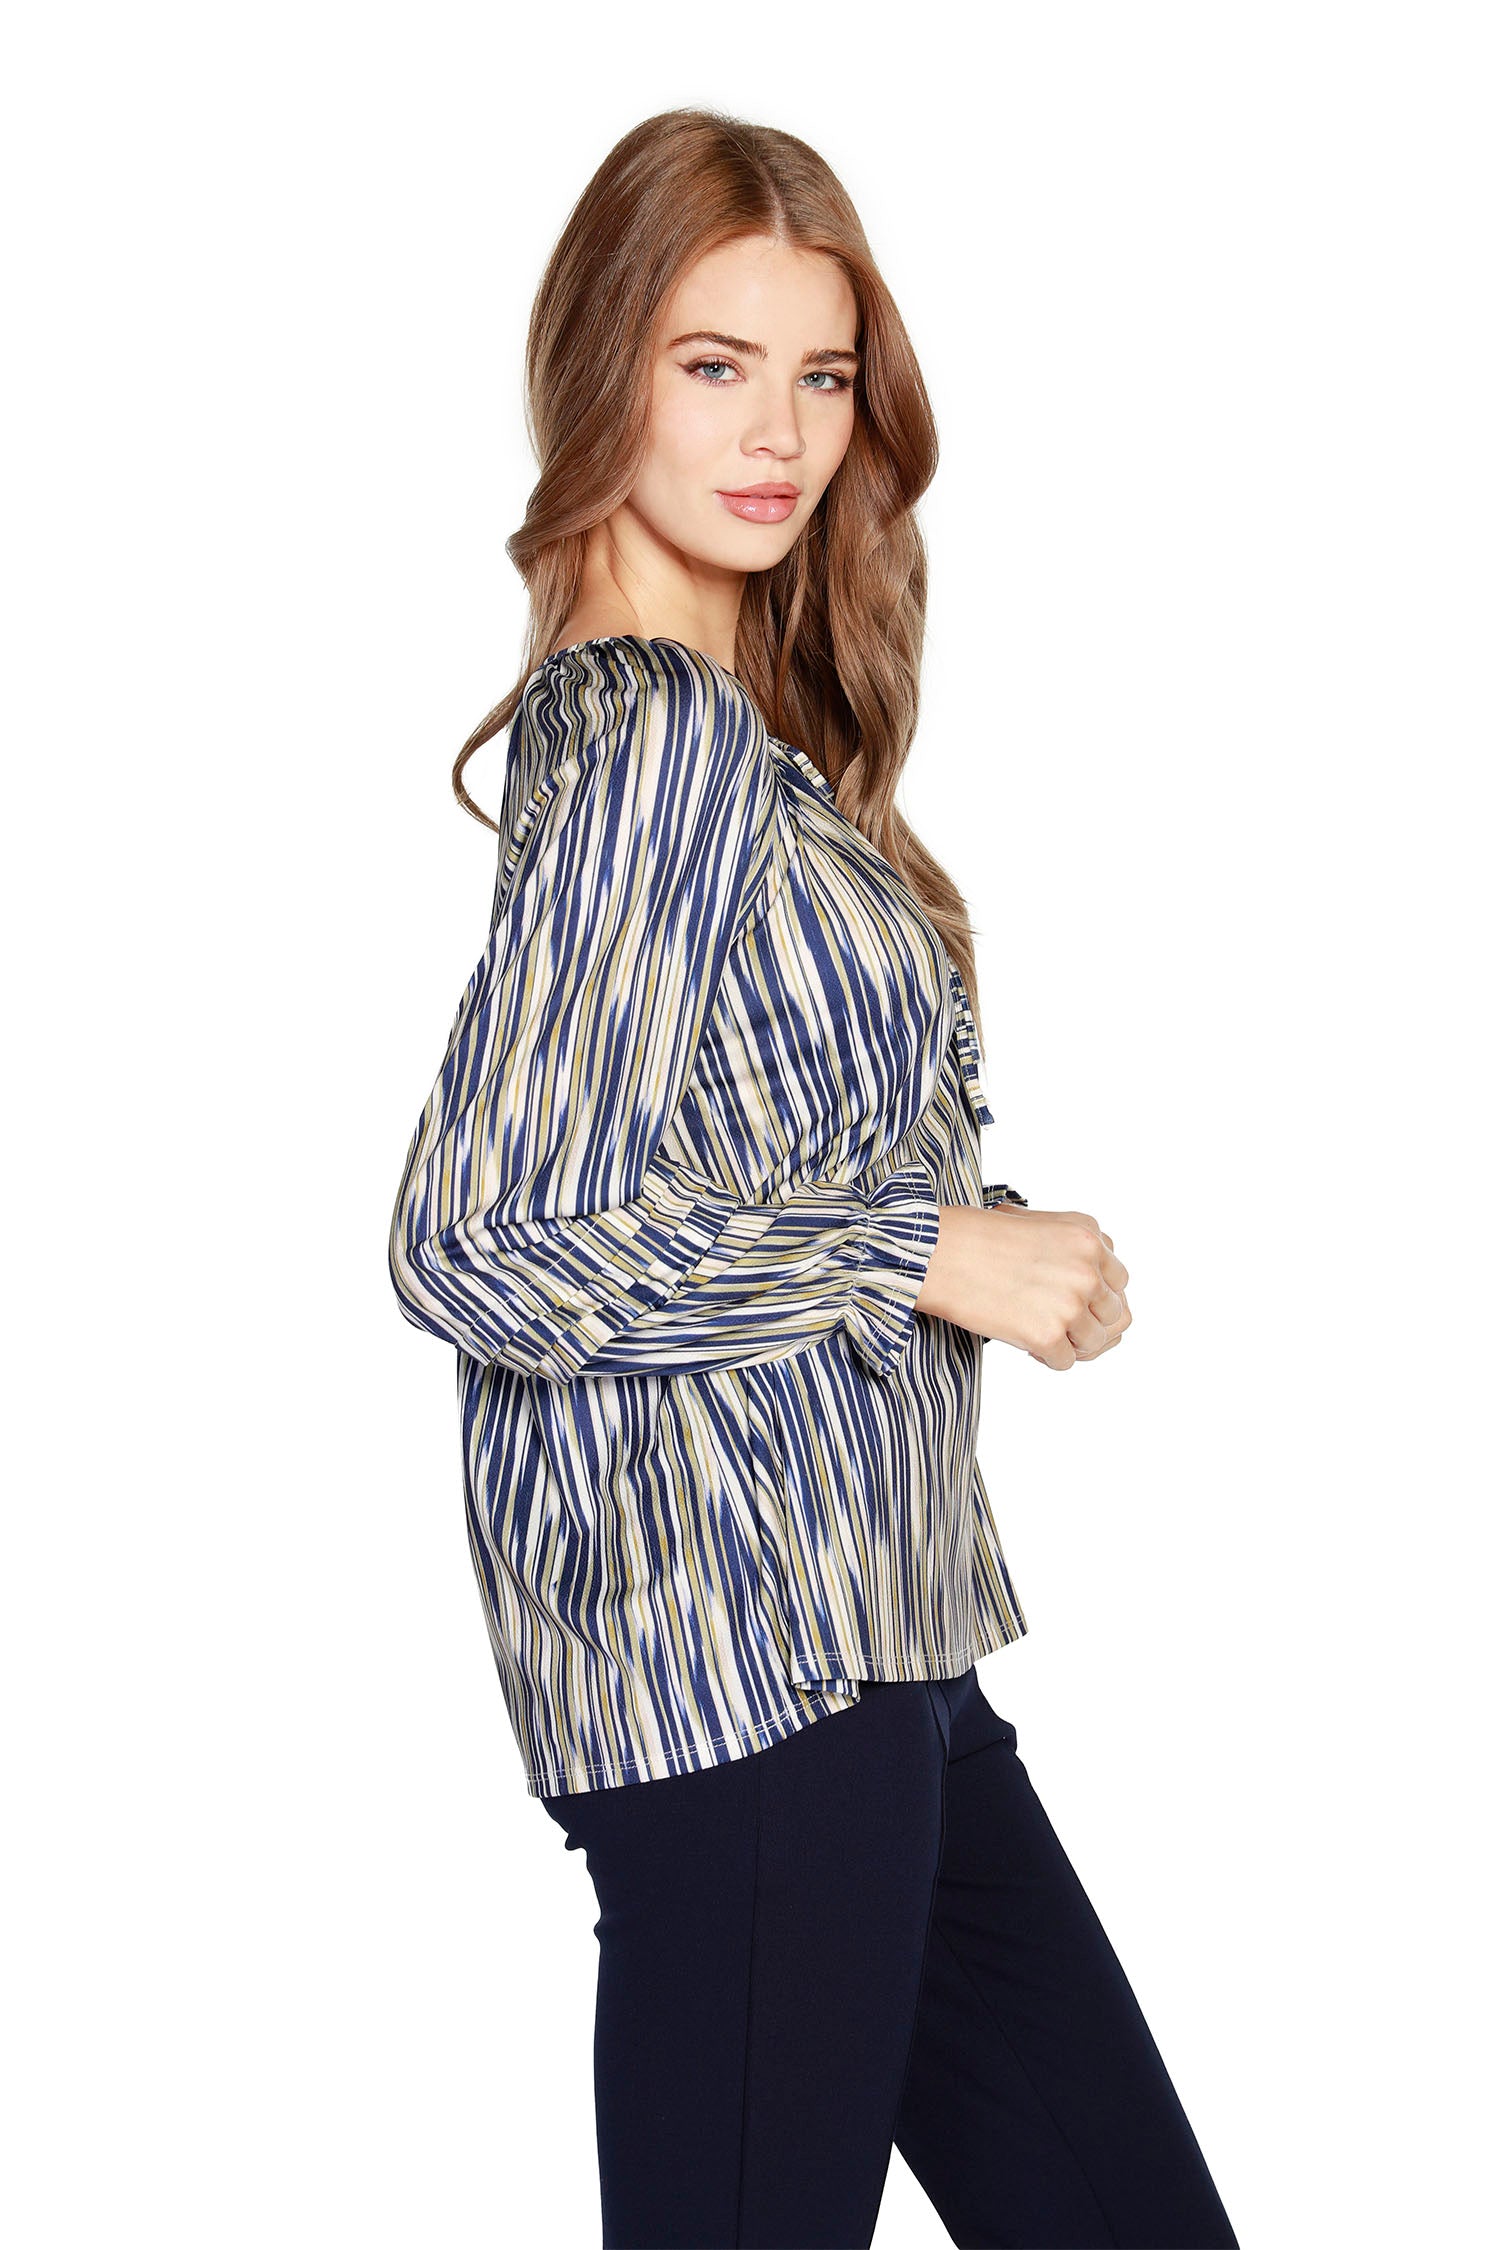 Women's Striped Knit Raglan Peasant Top with Keyhole Neck  |  LAST CALL